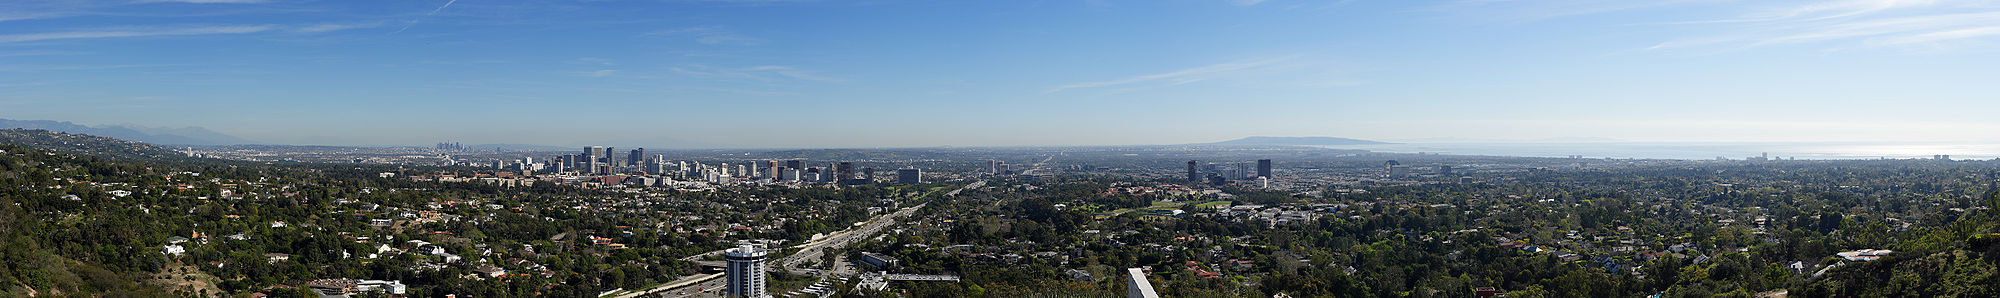 Metropolitan Los Angeles with Skyline of Los Angeles in the background and Century City in the foreground, from the Getty Center